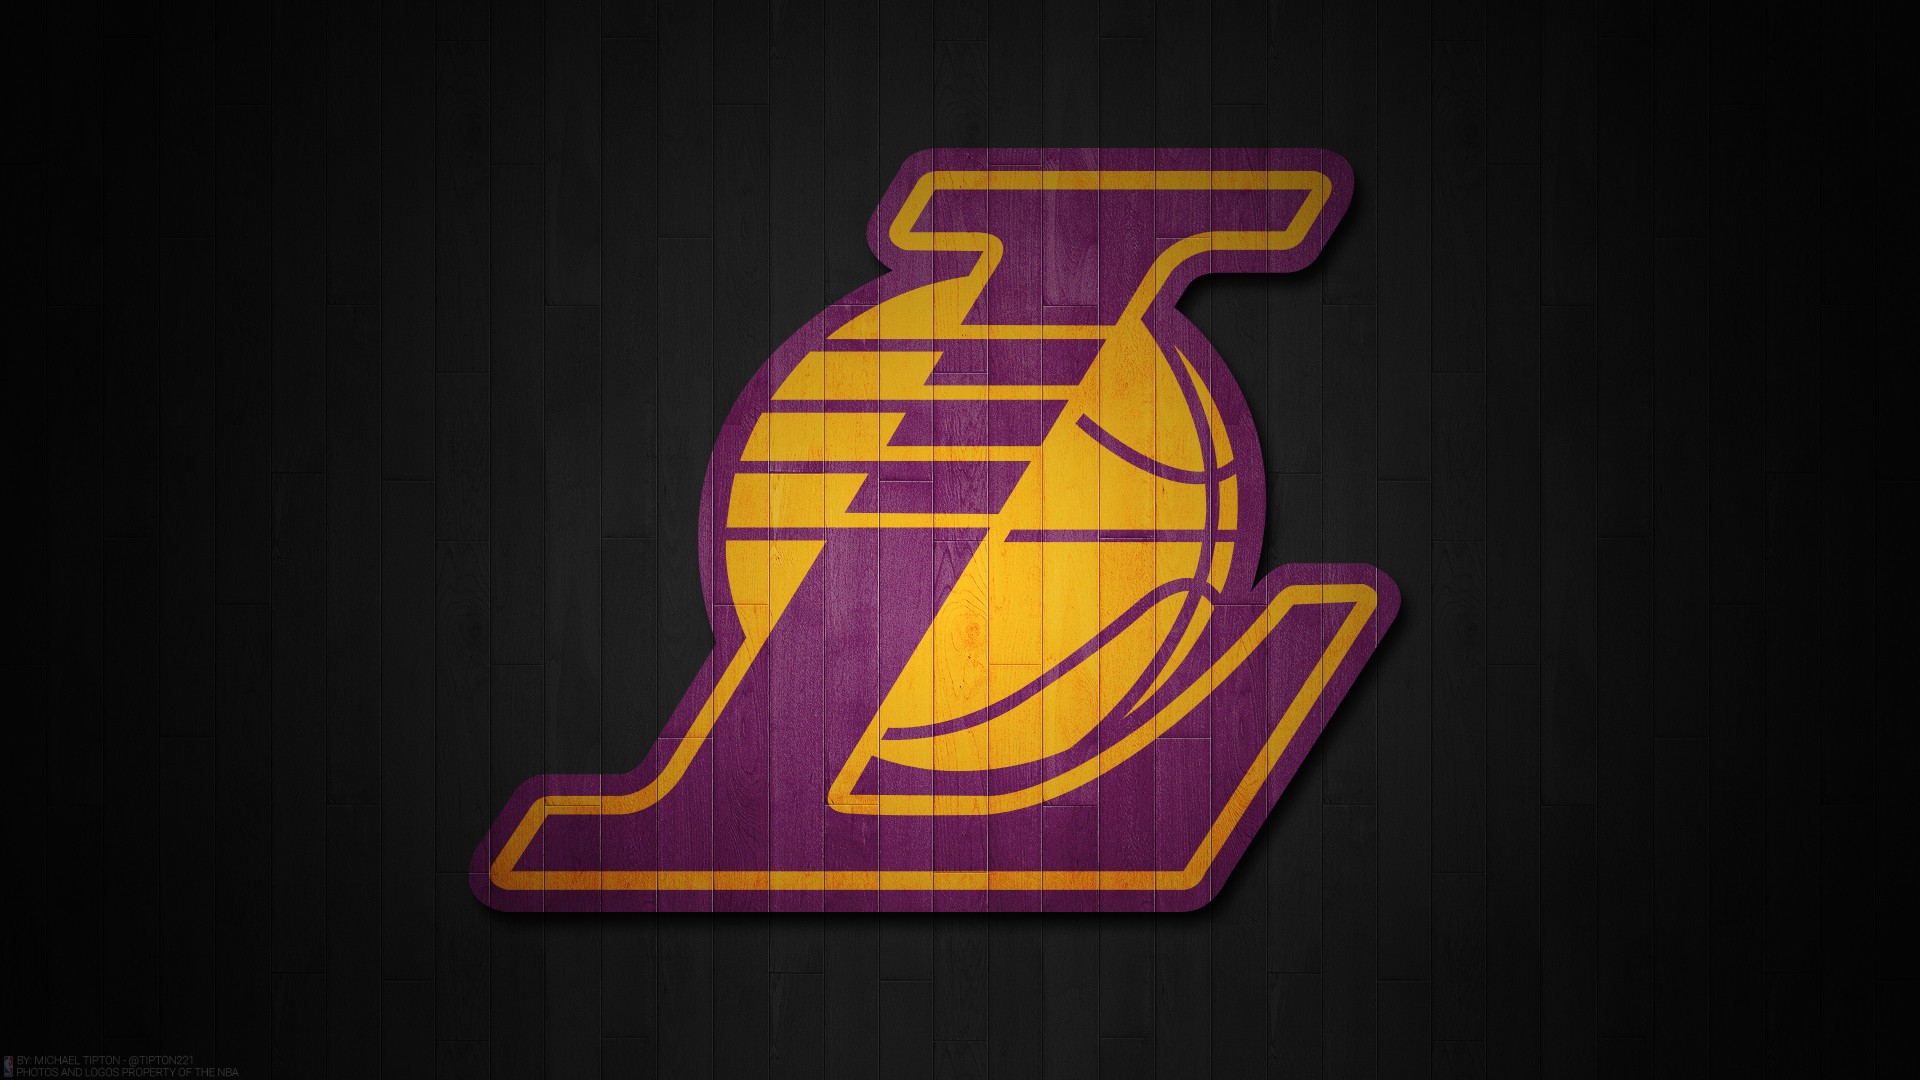 HD Backgrounds LA Lakers with image dimensions 1920x1080 pixel. You can make this wallpaper for your Desktop Computer Backgrounds, Windows or Mac Screensavers, iPhone Lock screen, Tablet or Android and another Mobile Phone device